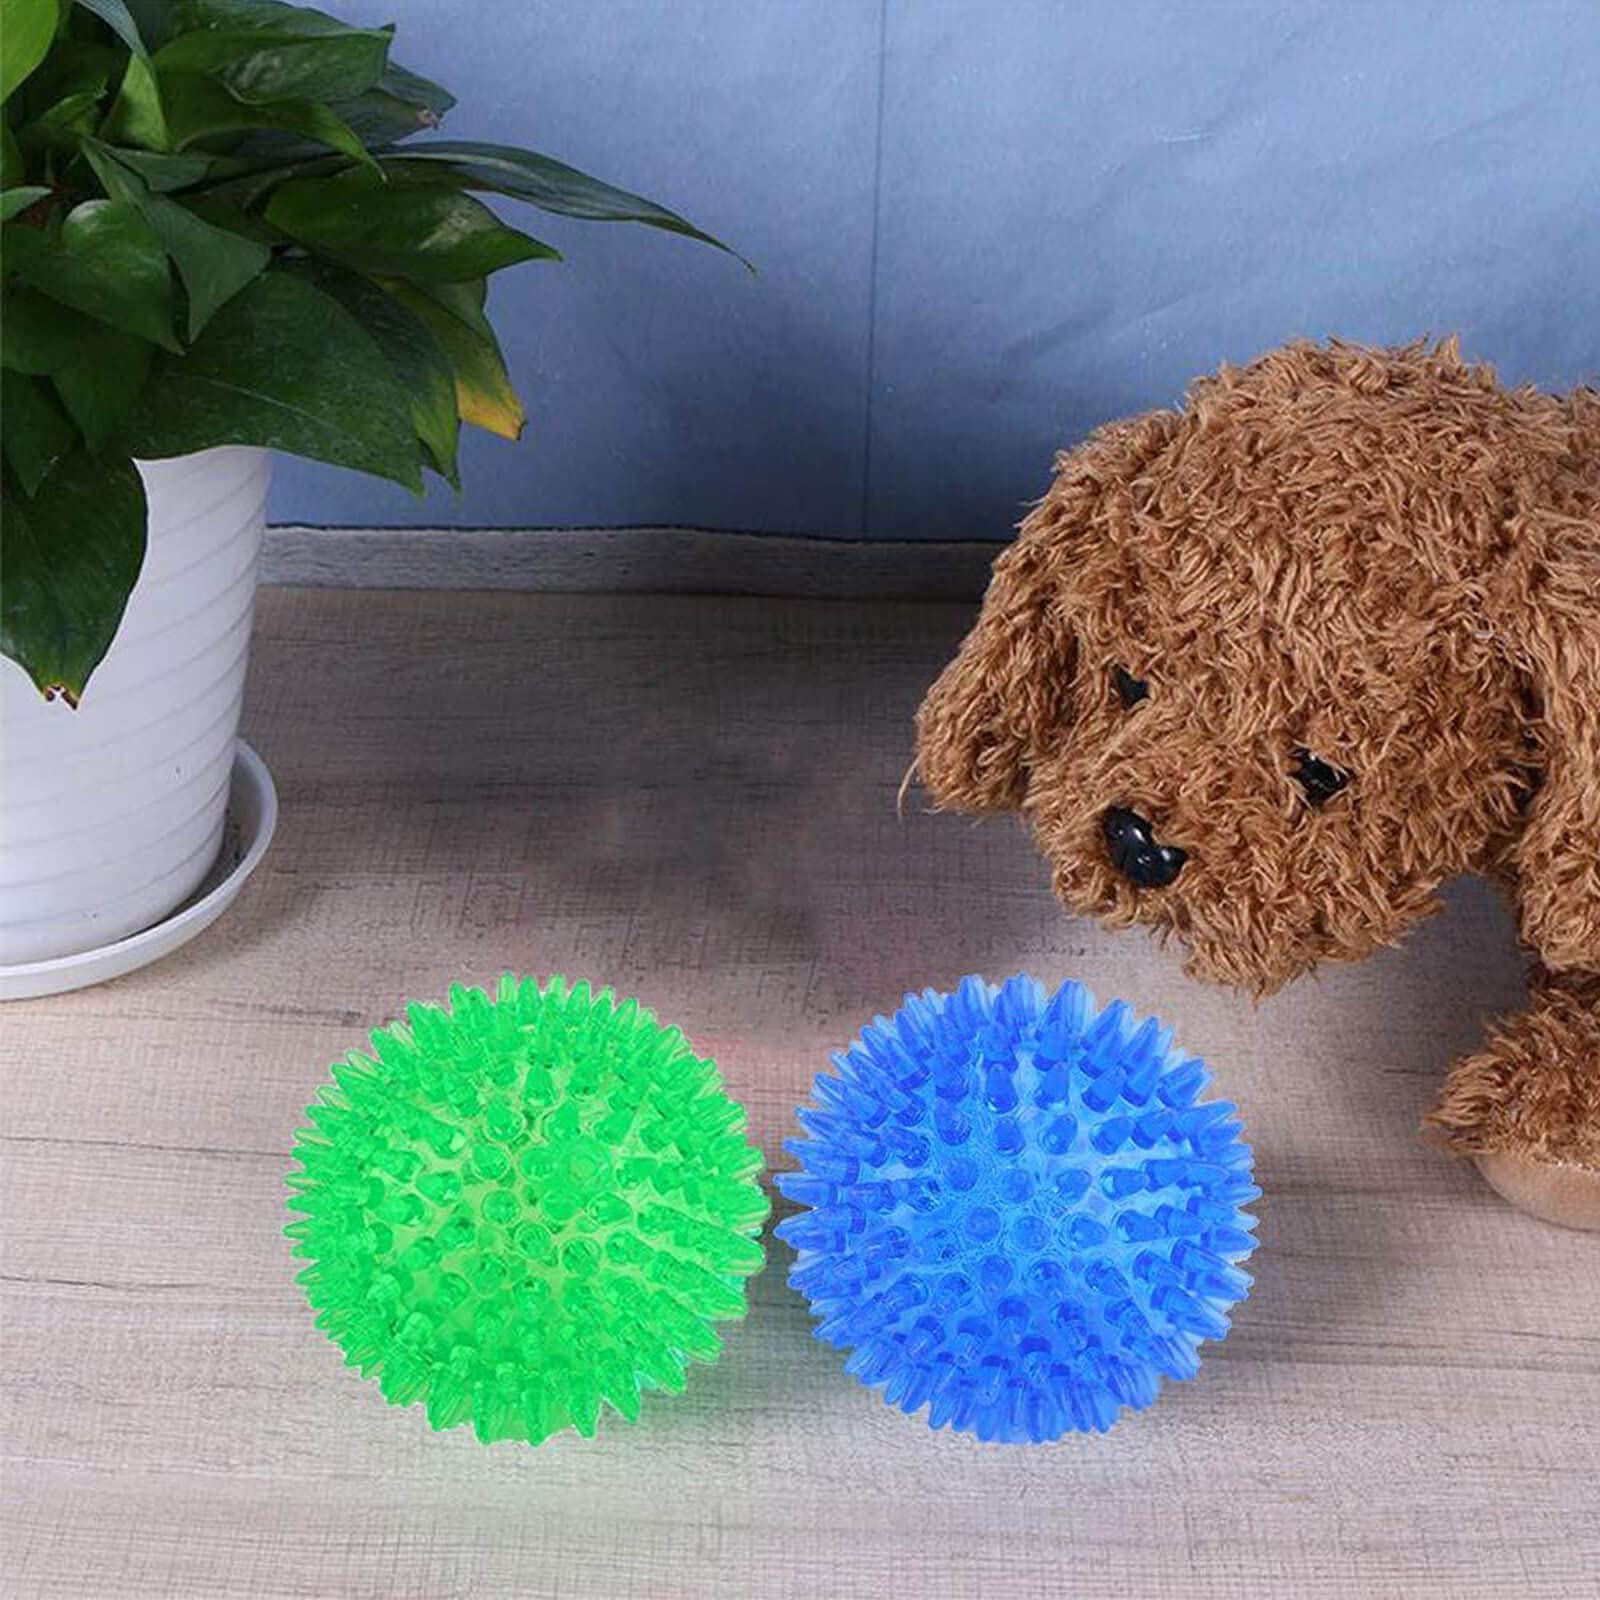 Orgrimmar 3 PCS Pet Squeaky Chewing Balls Dog Soft Stab Balls Cleaning Teeth Toys Balls with High Bounce for Small Medium Large Pet Dog Cat Toys(Medium,3.54in)